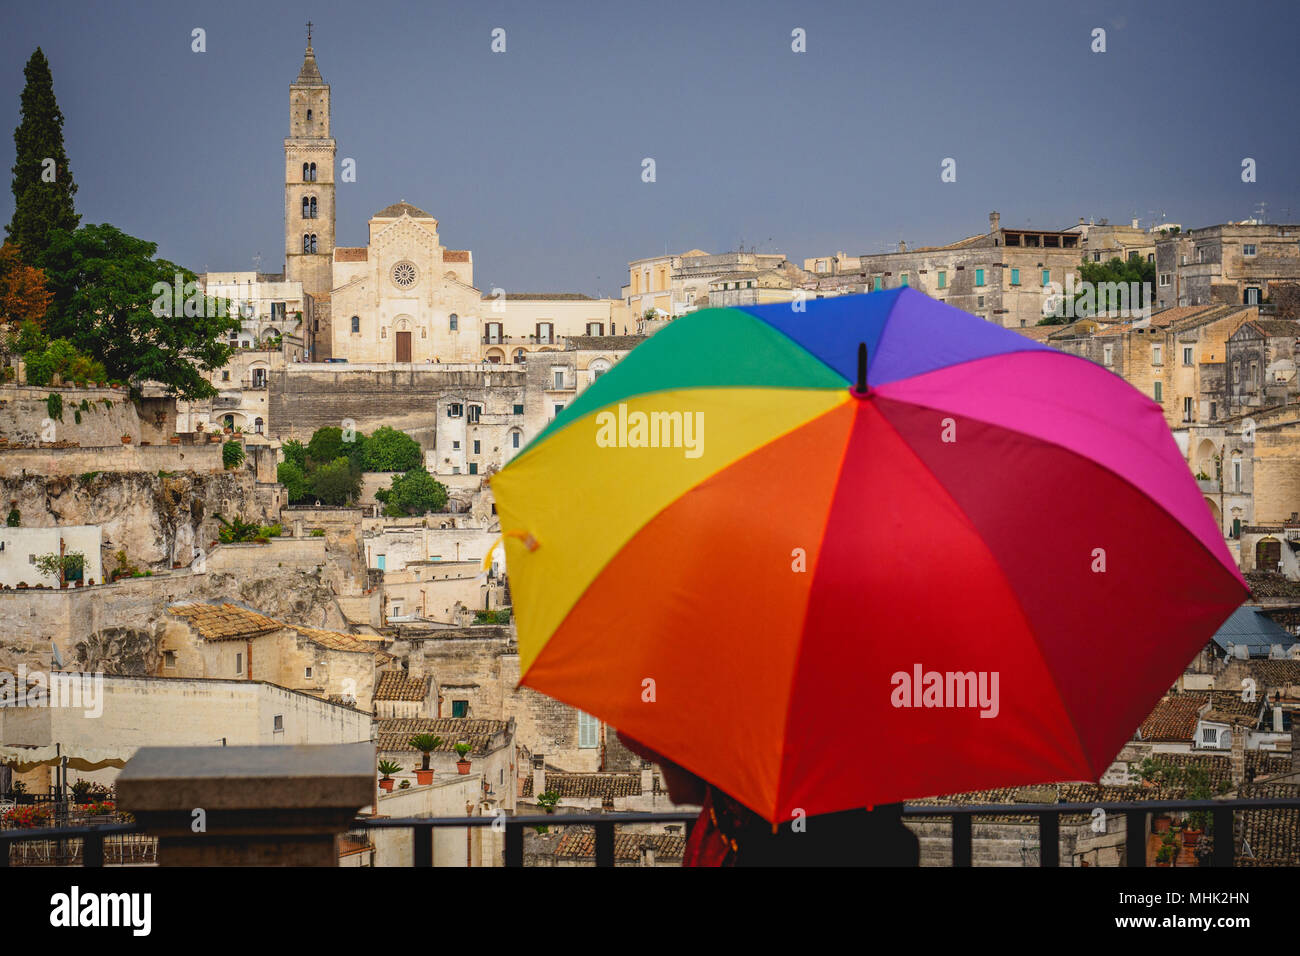 Matera (Italy), September 2017. Tourist with a rainbow umbrella at the belvedere over the ancient town called 'Sassi di Matera'. Landscape format. Stock Photo